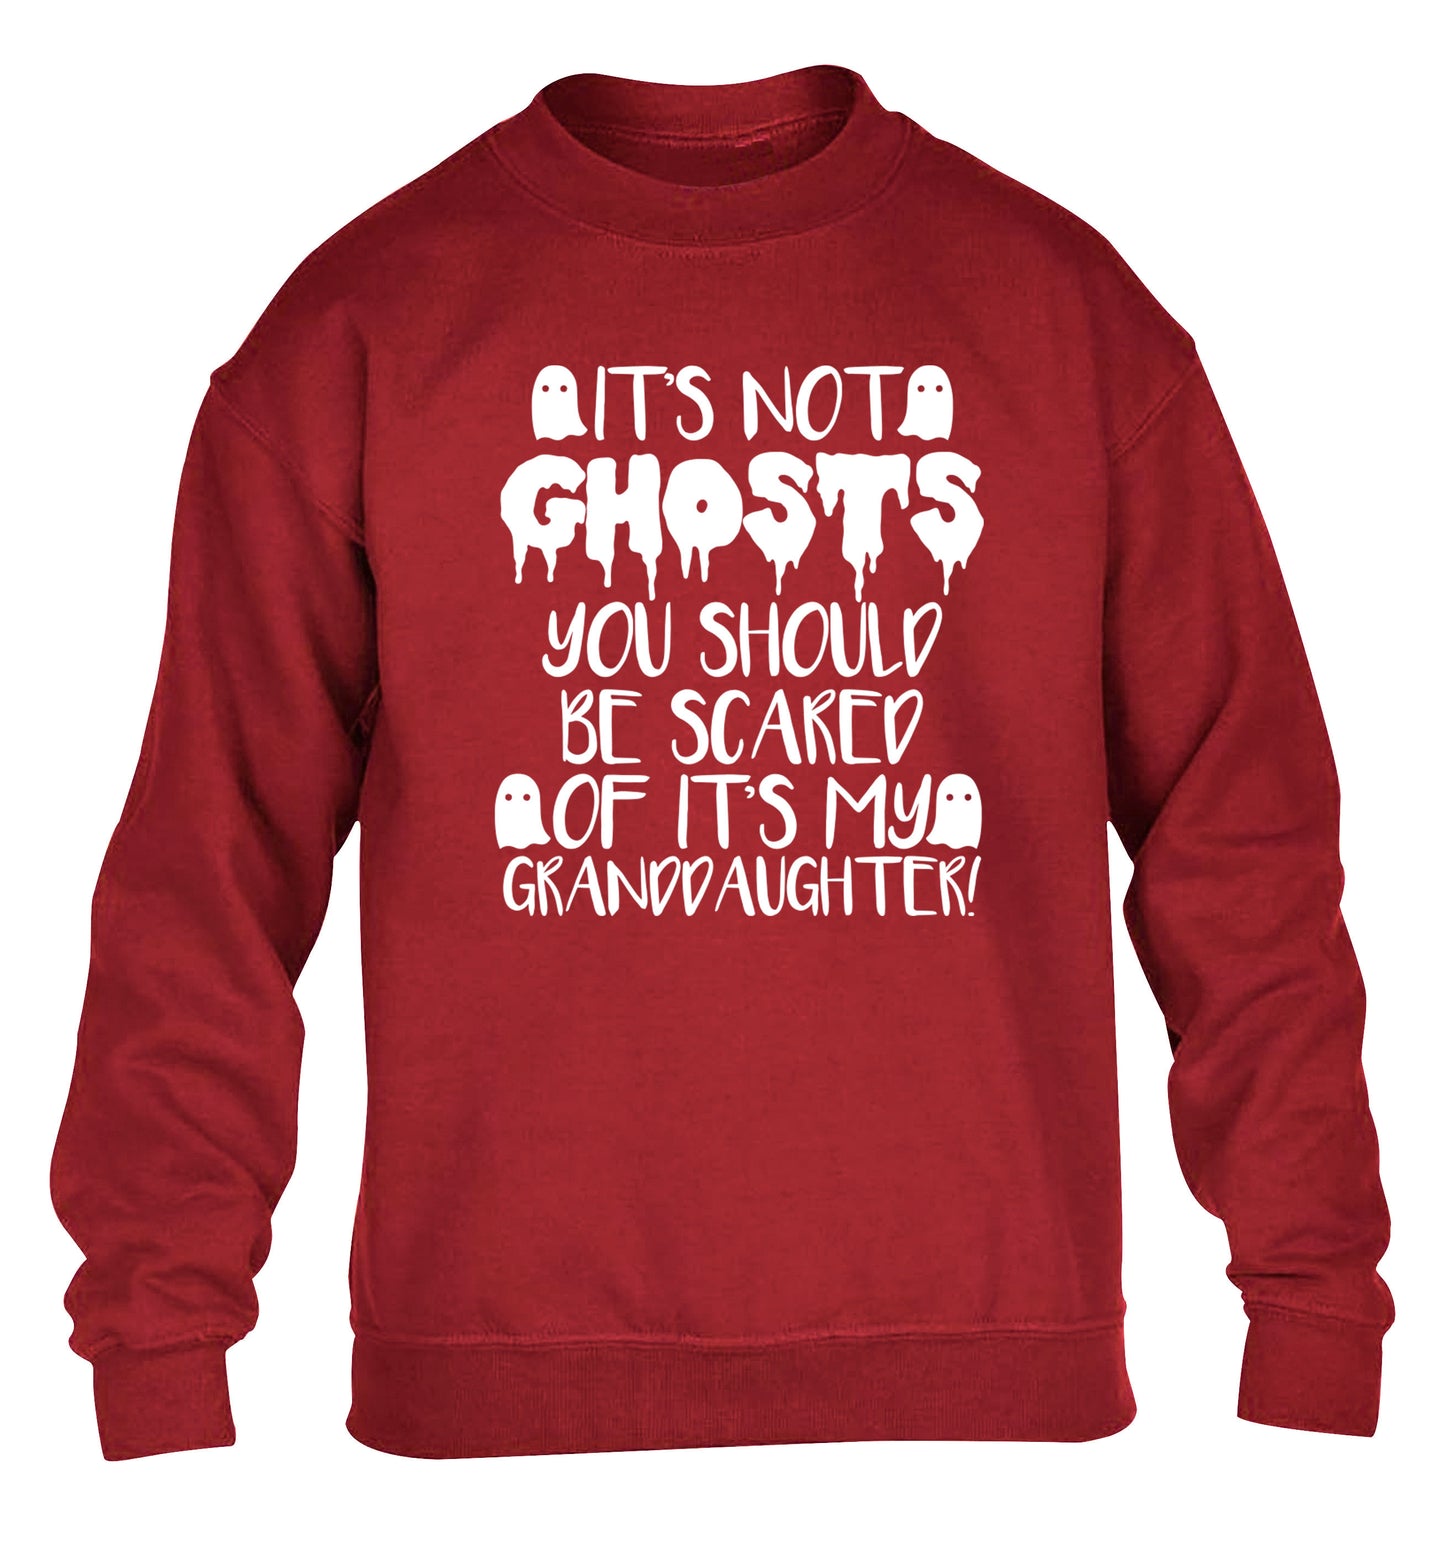 It's not ghosts you should be scared of it's my granddaughter! children's grey sweater 12-14 Years